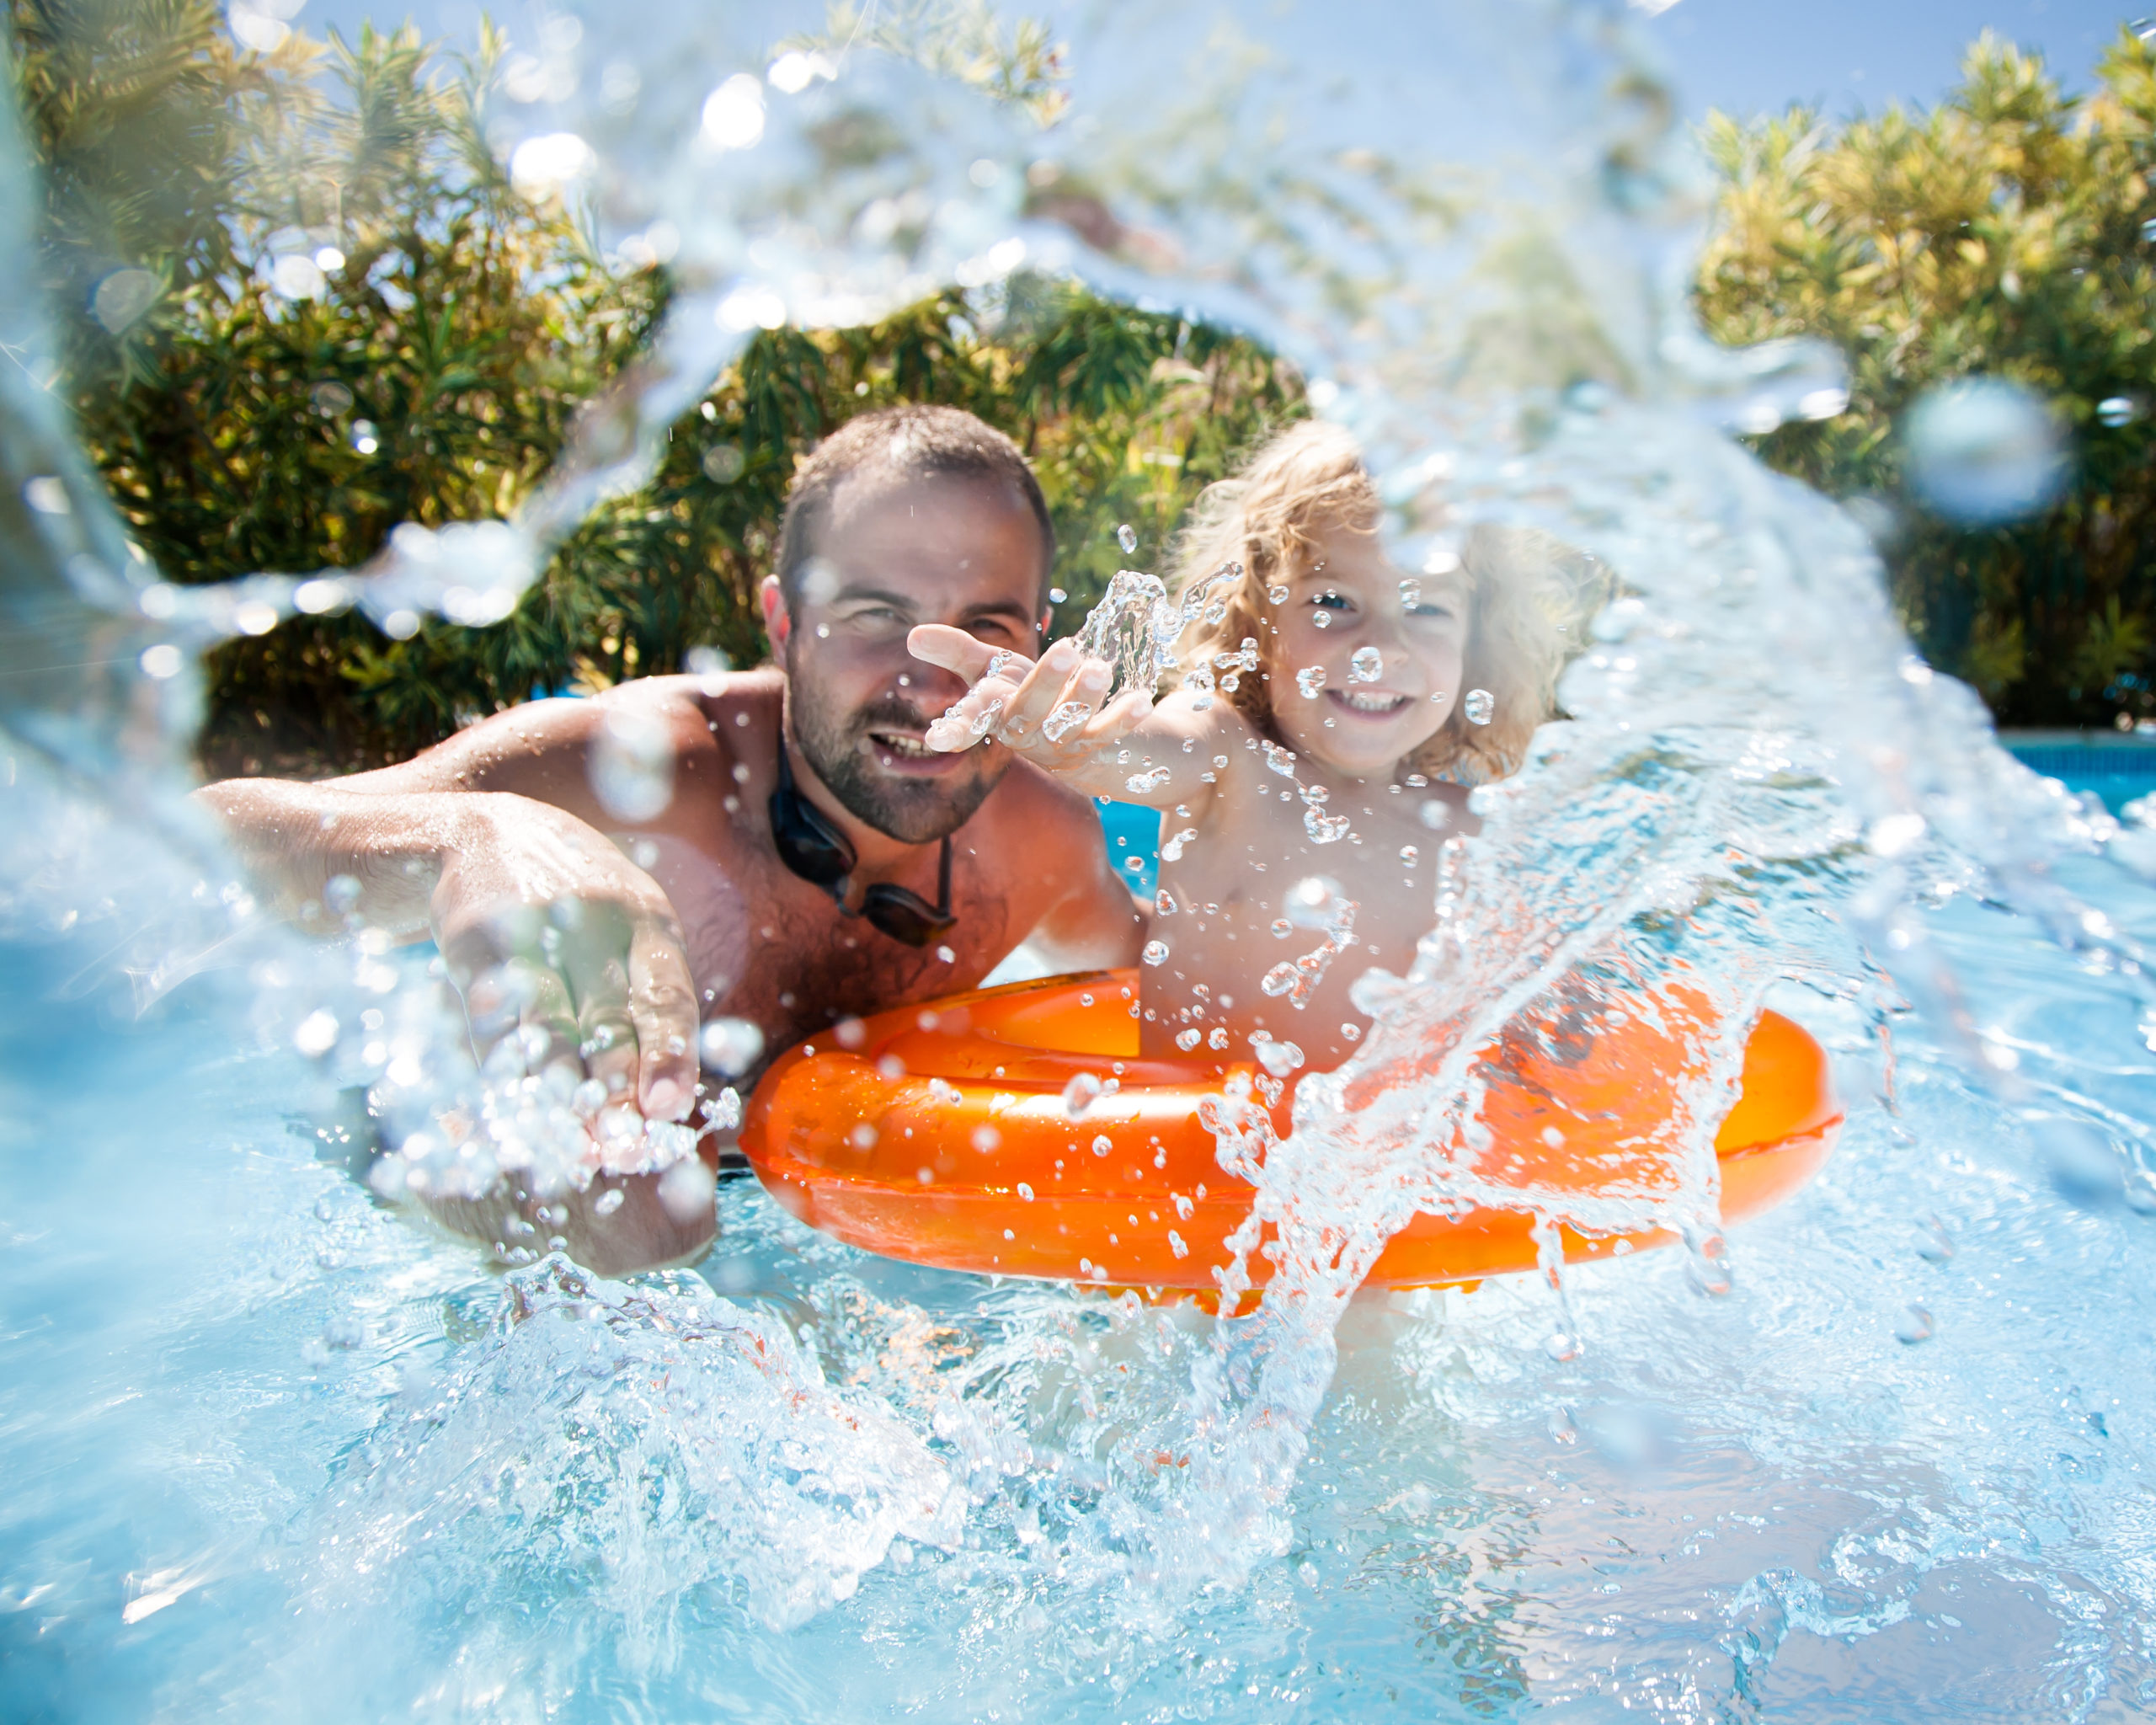 A man and his child joyfully splashing water in the pool